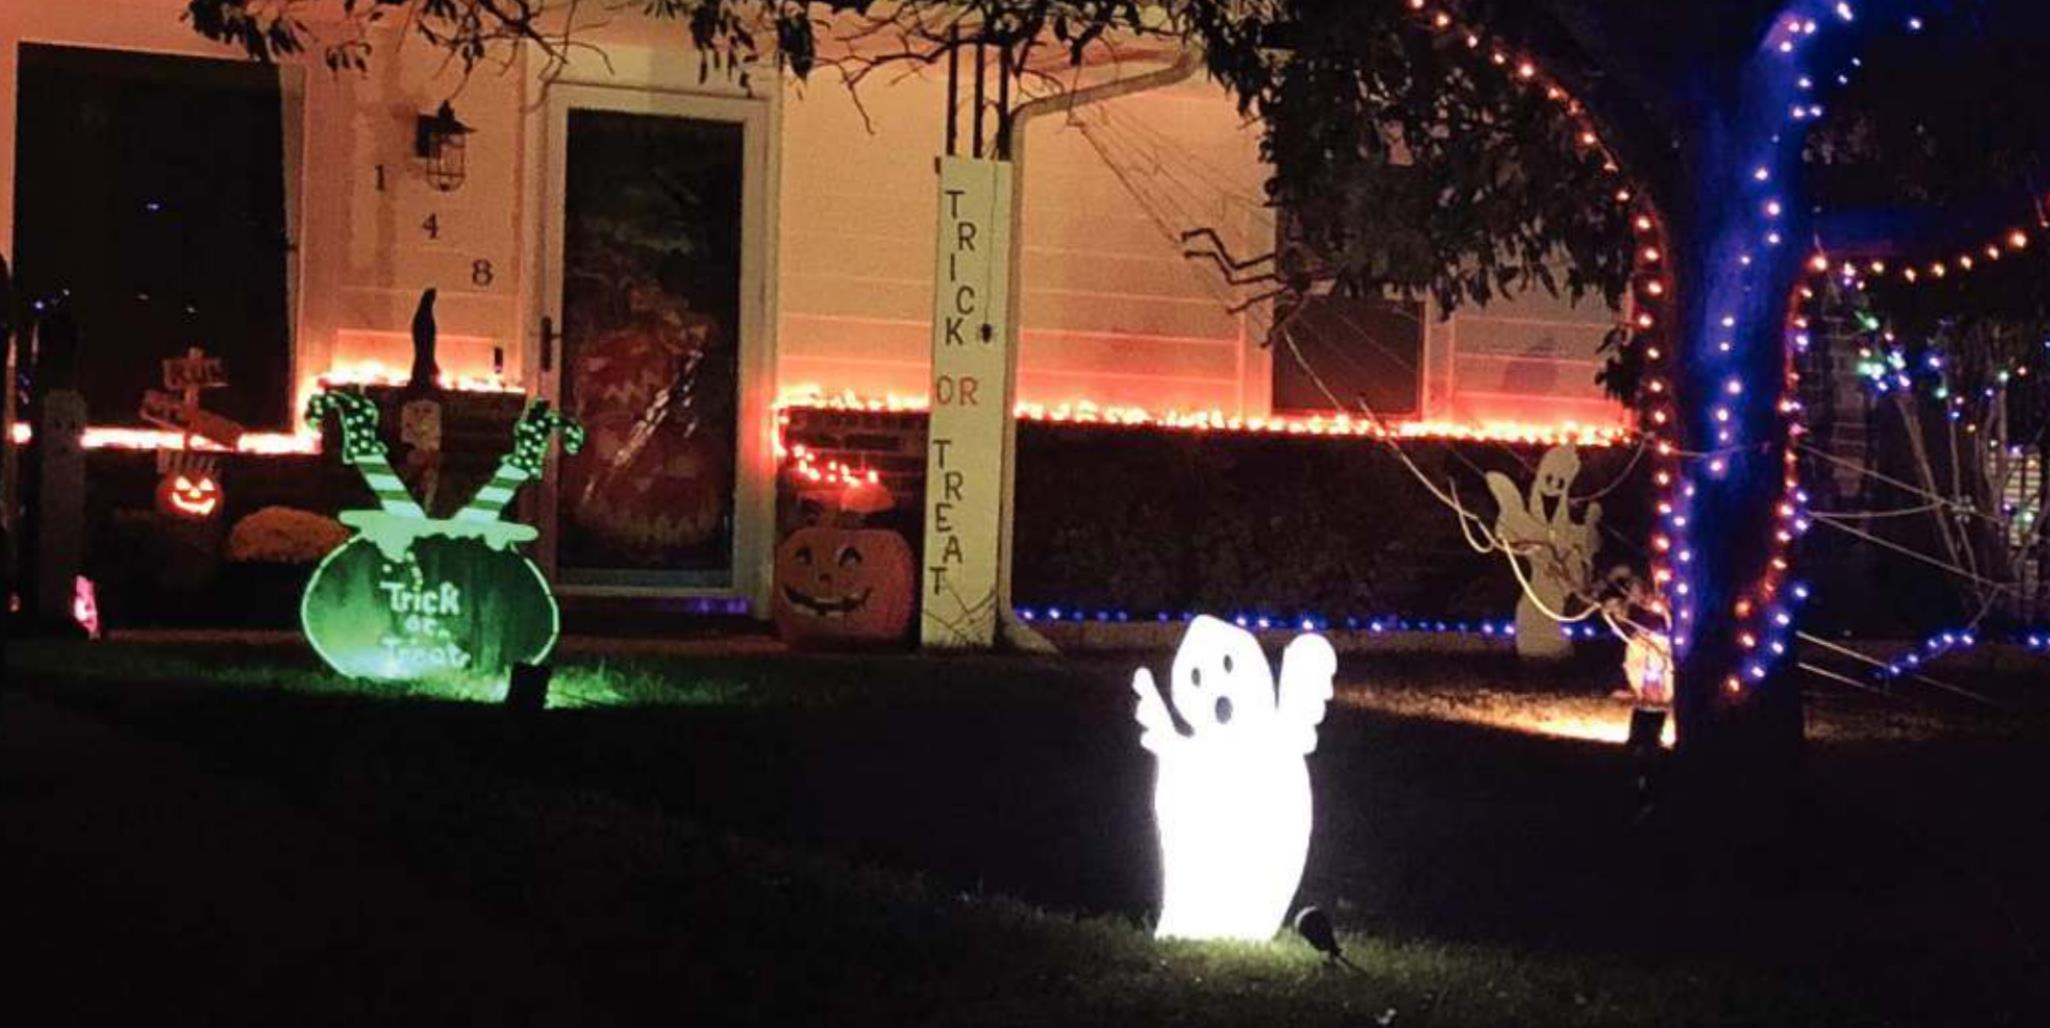 Residents of Weatherford have decorated their houses for the Halloween spirit. Door-to-door trick-or-treating will take place Halloween night. Montgomery Malone/WDN